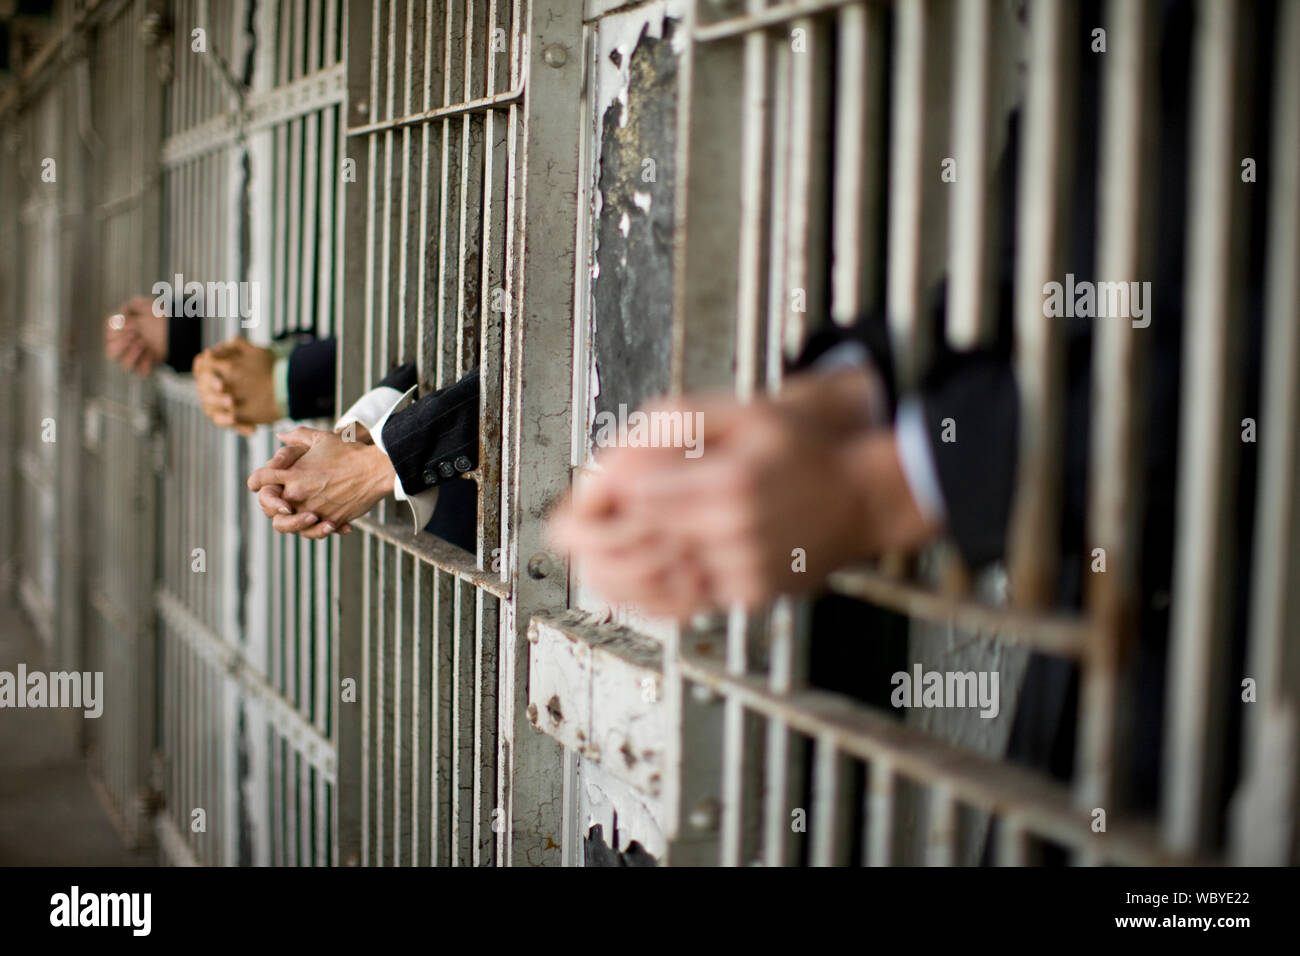 Hands of a mid-adult business woman and three colleagues through bars of a prison cell in a derelict building. Stock Photo